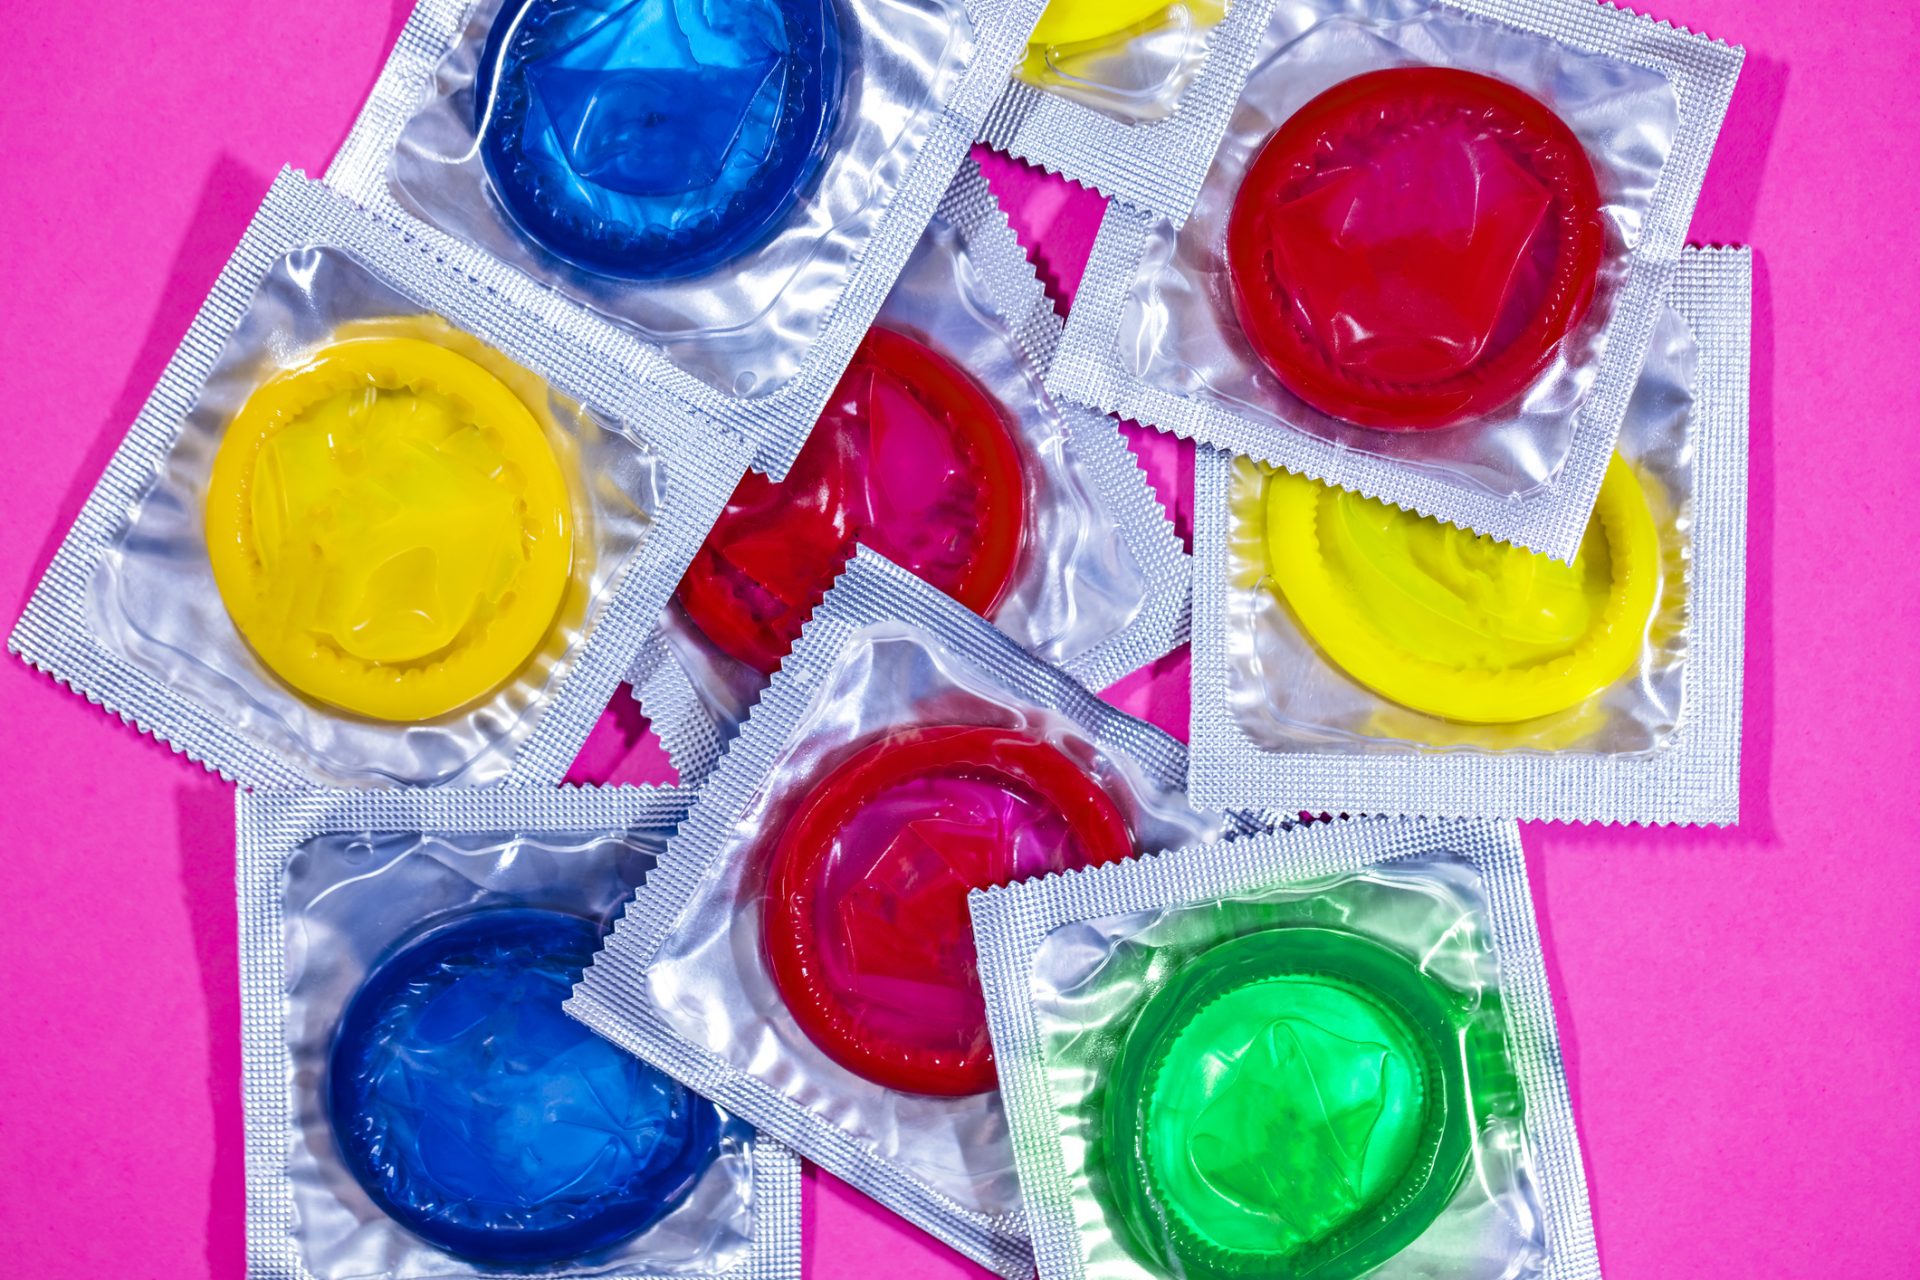 ‘Forever chemicals’ in contraceptives 